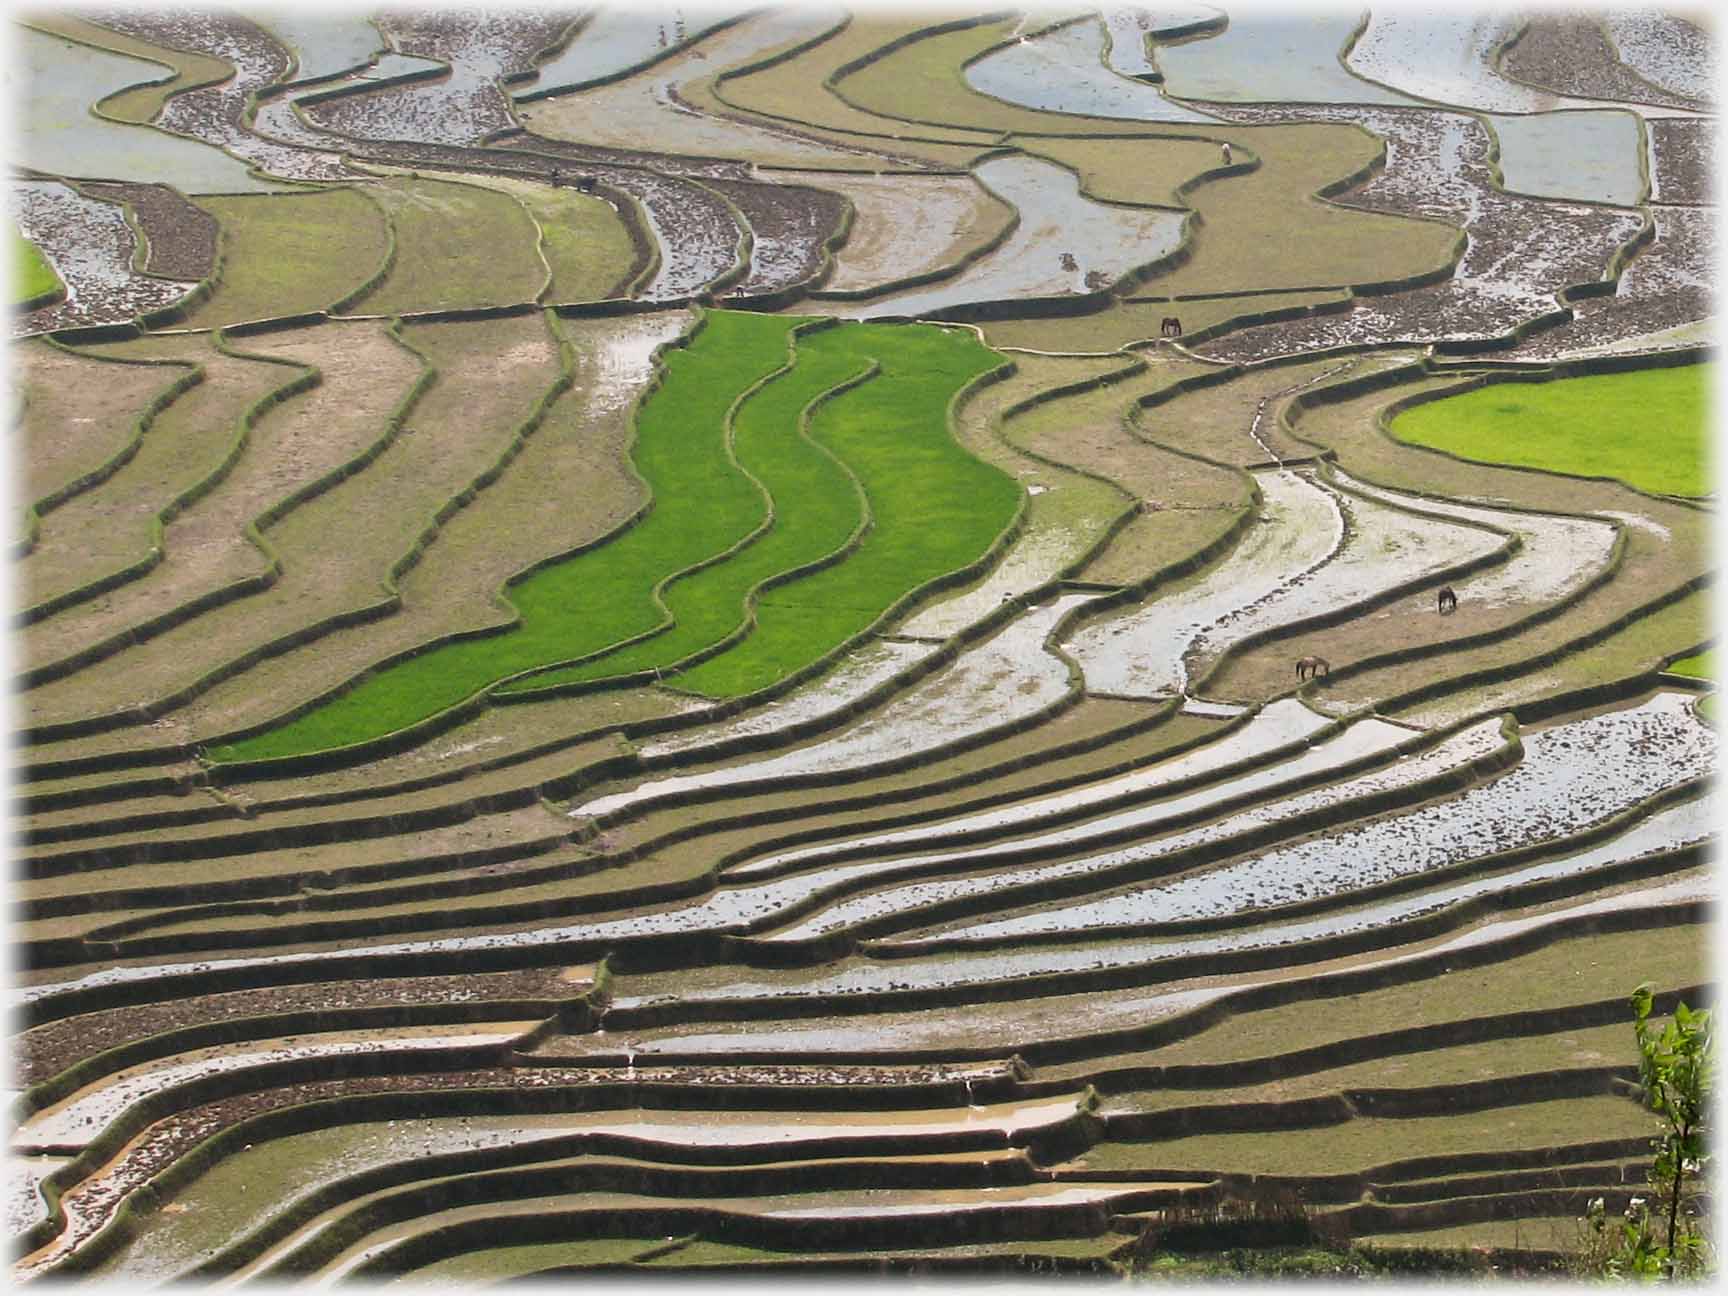 Terraced fields, some with dark green, some light green, and some just showing green.